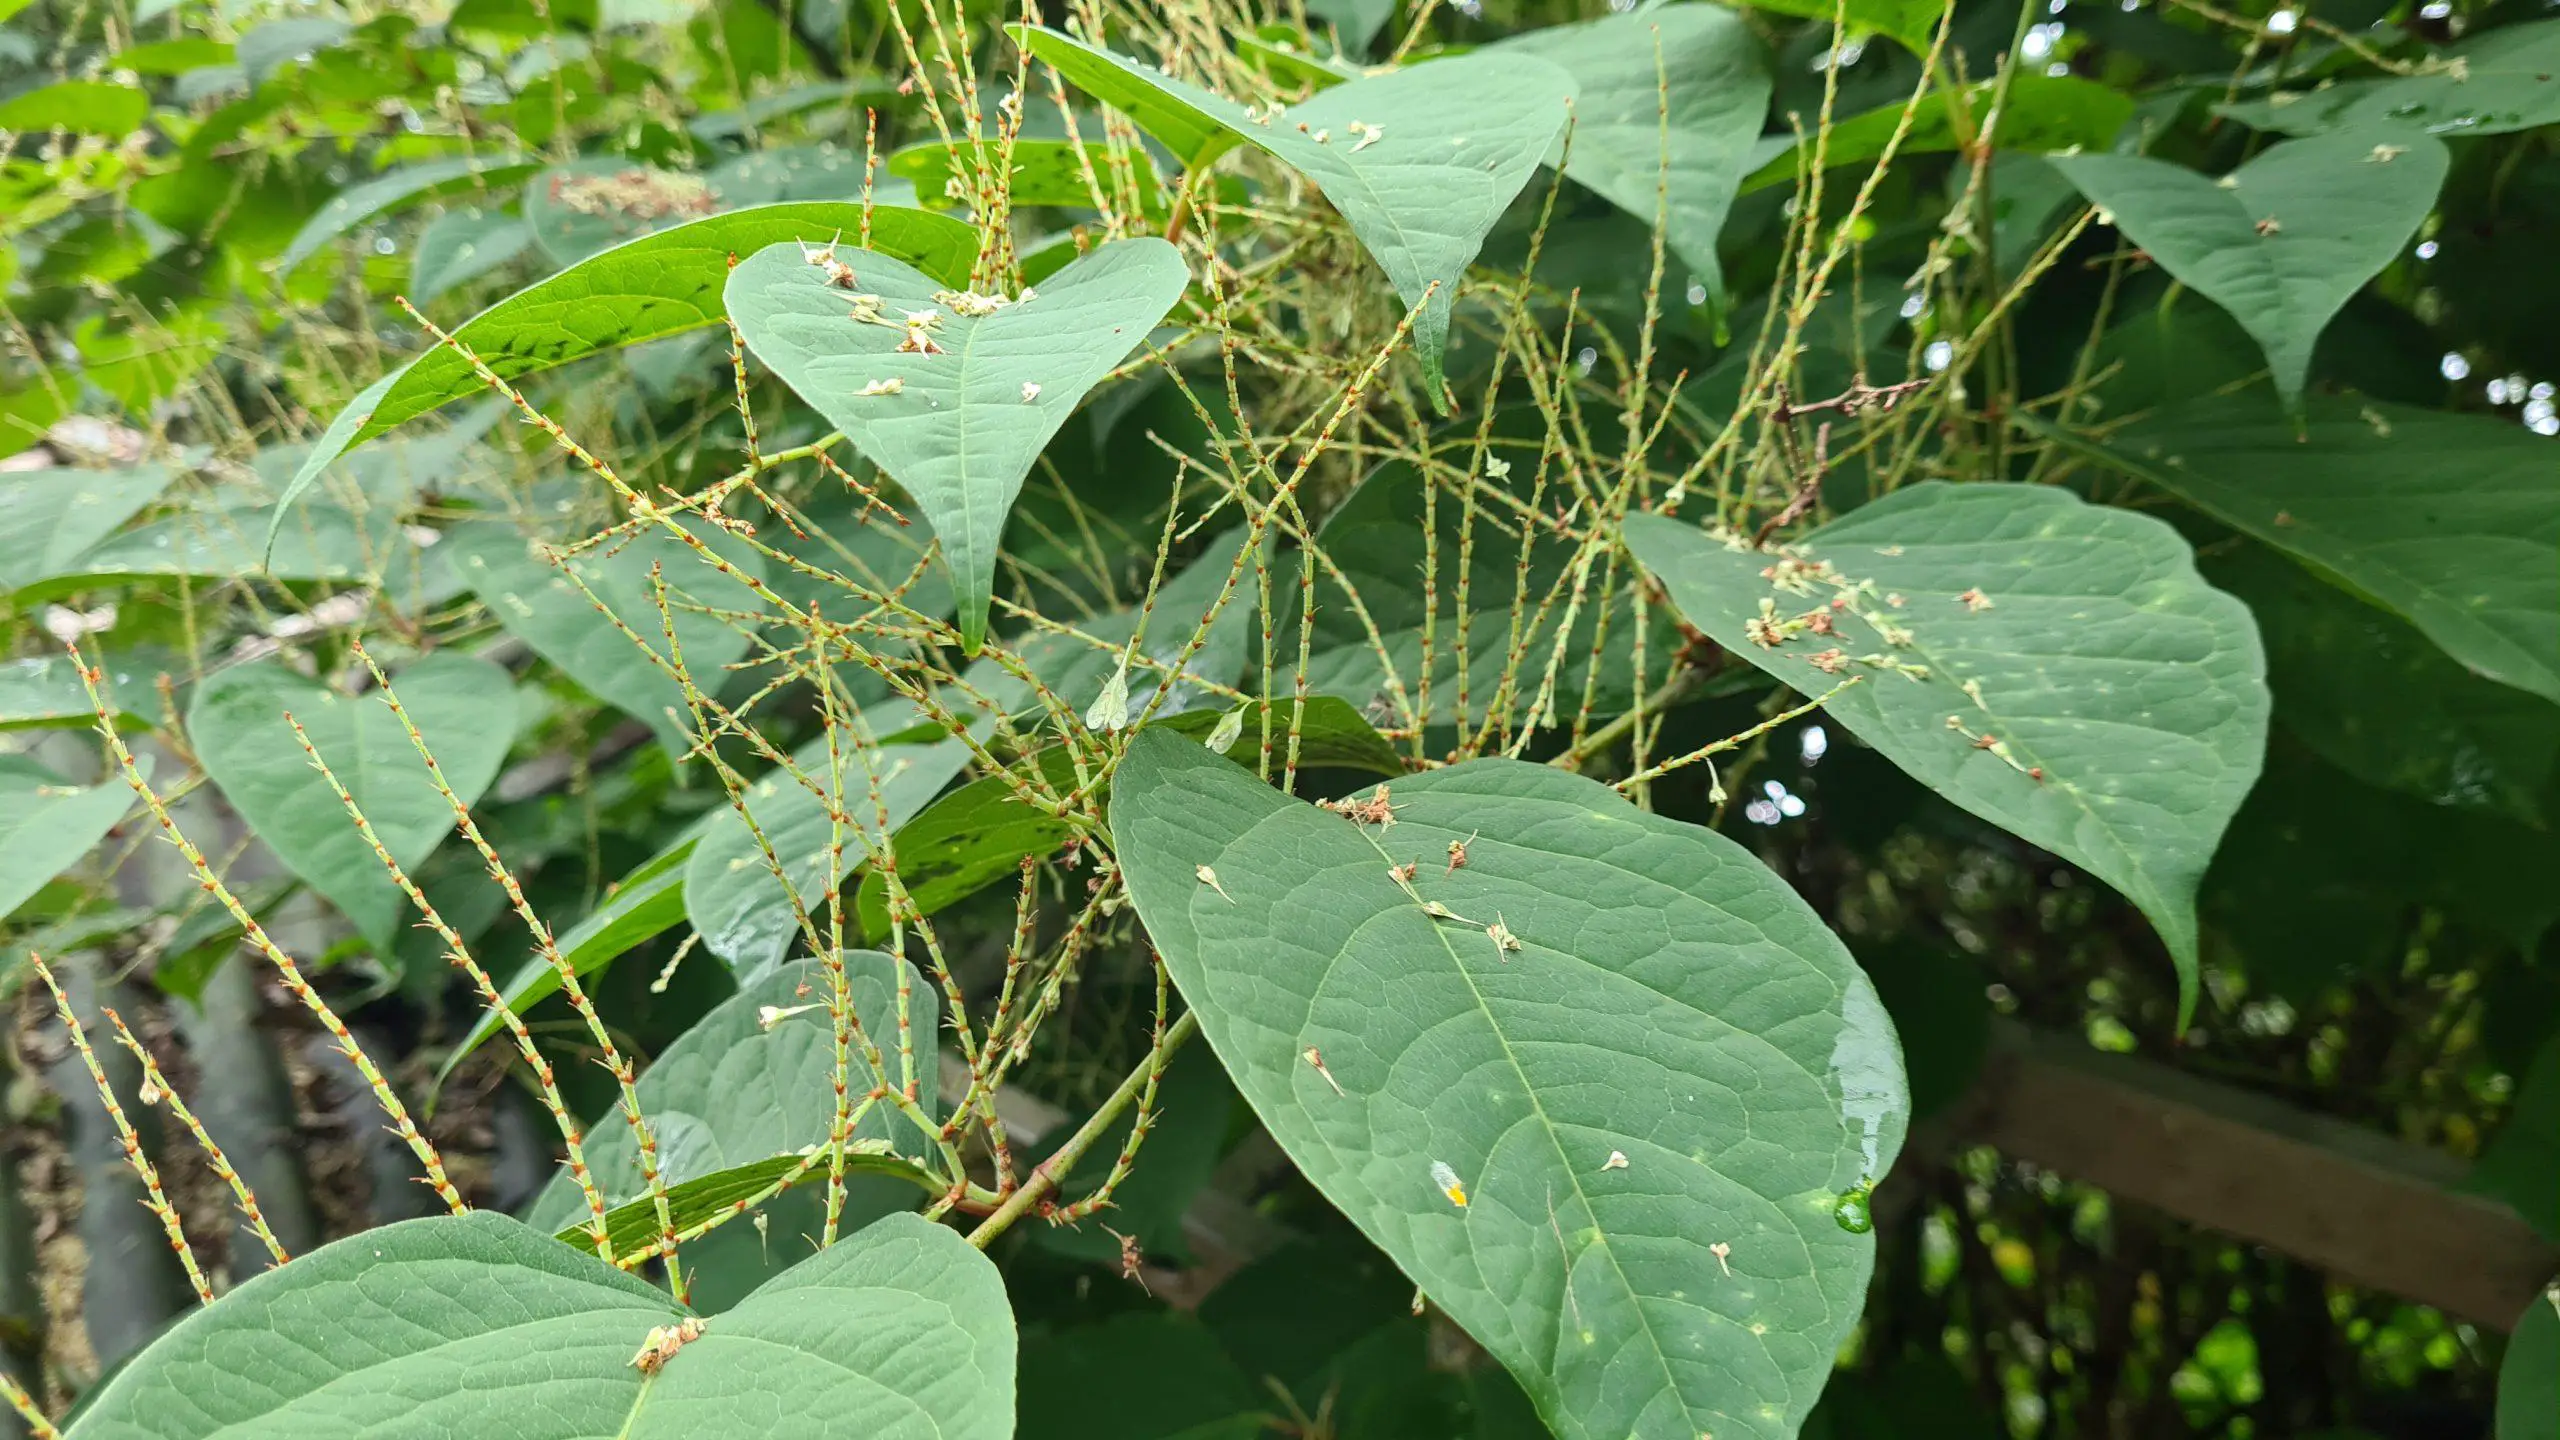 Japanese knotweed invasive plants can quickly take over your garden